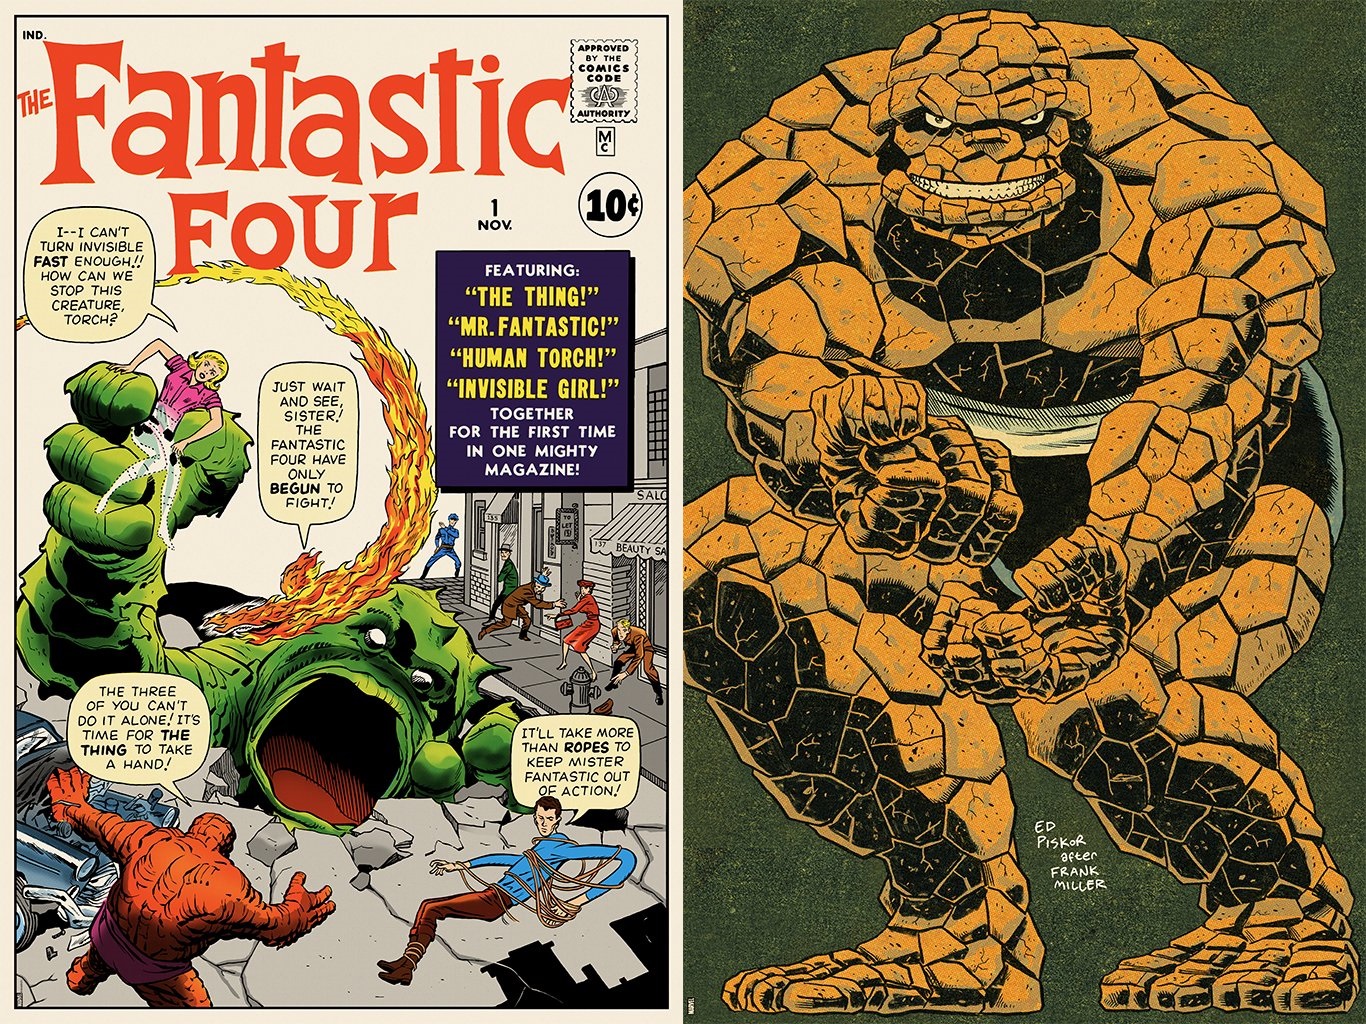 JACK KIRBY & STAN LEE NM FANTASTIC FOUR 1 THE LOST ADVENTURE